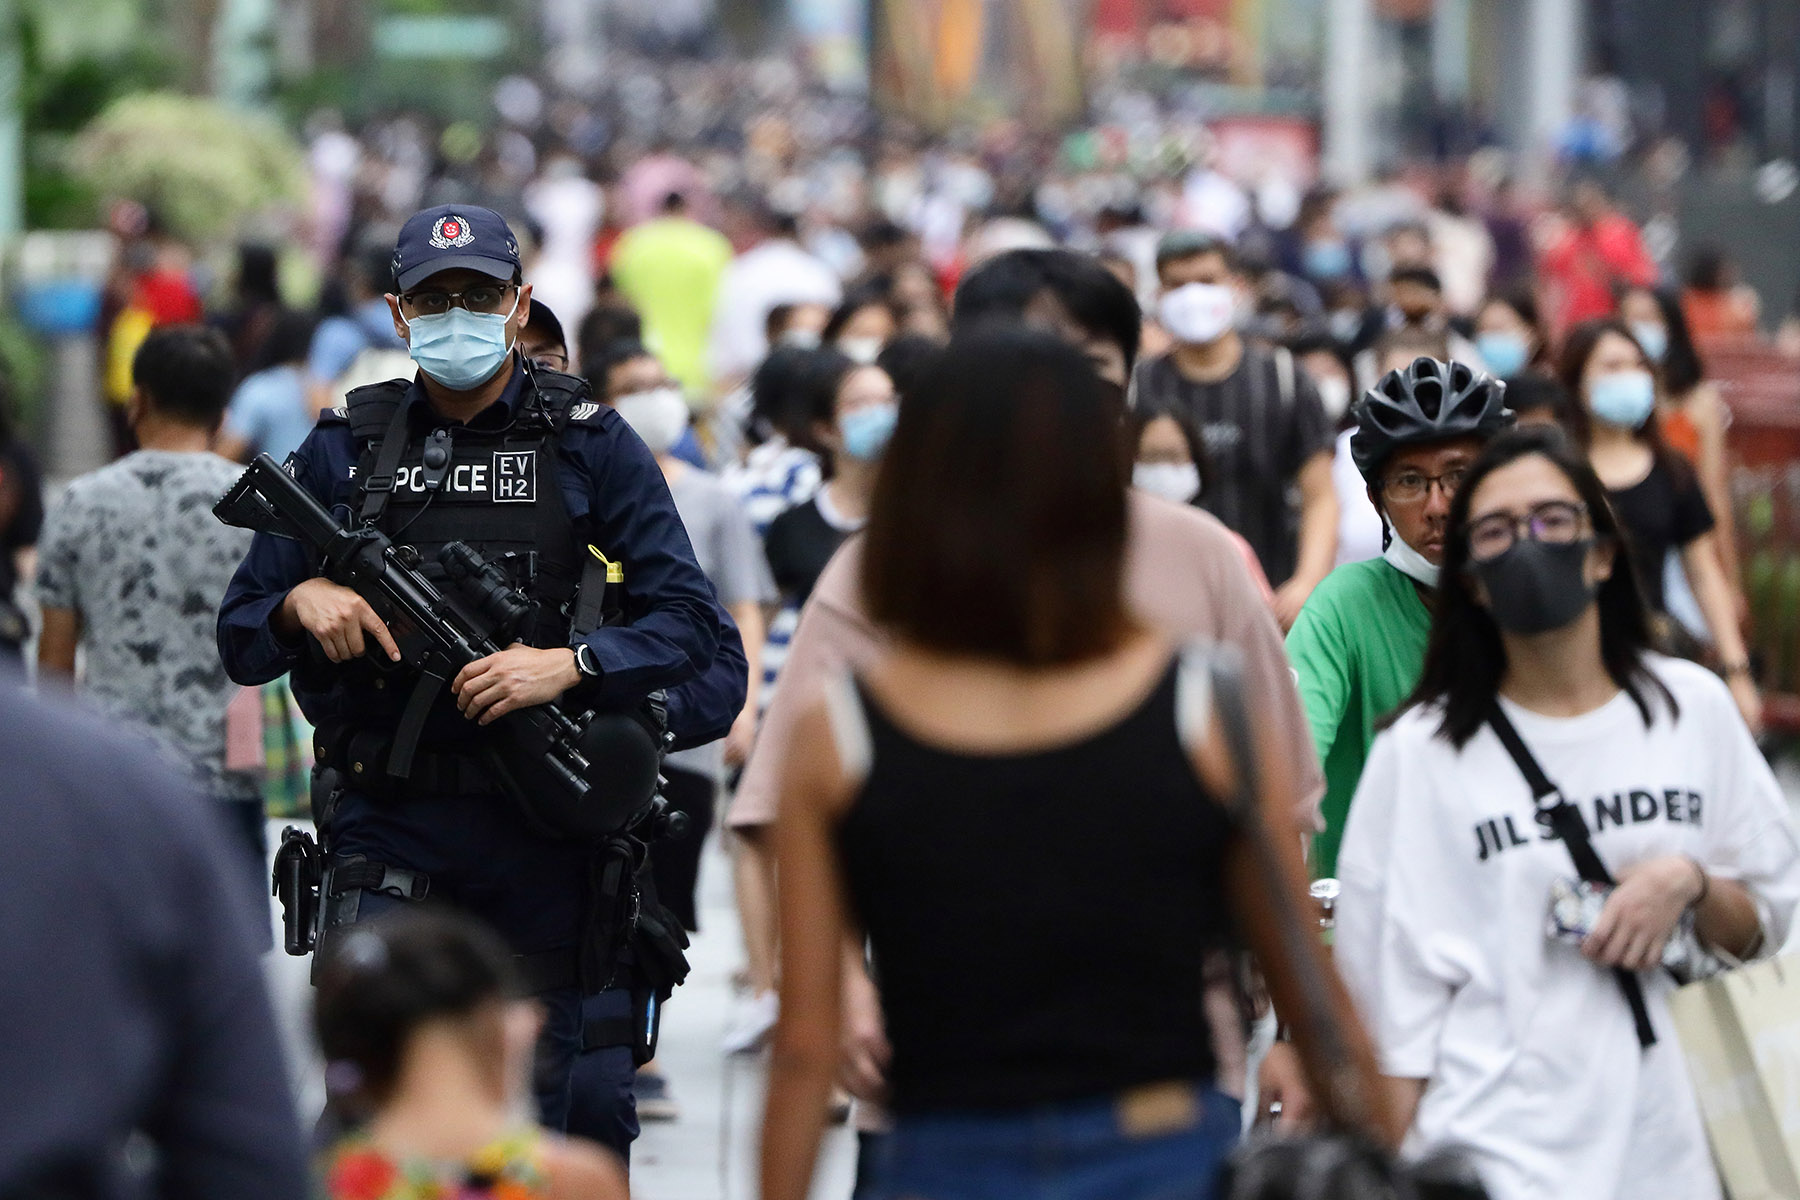 Police officer with glasses and a face mask is holding a huge gun while patrolling in a busy crowd.